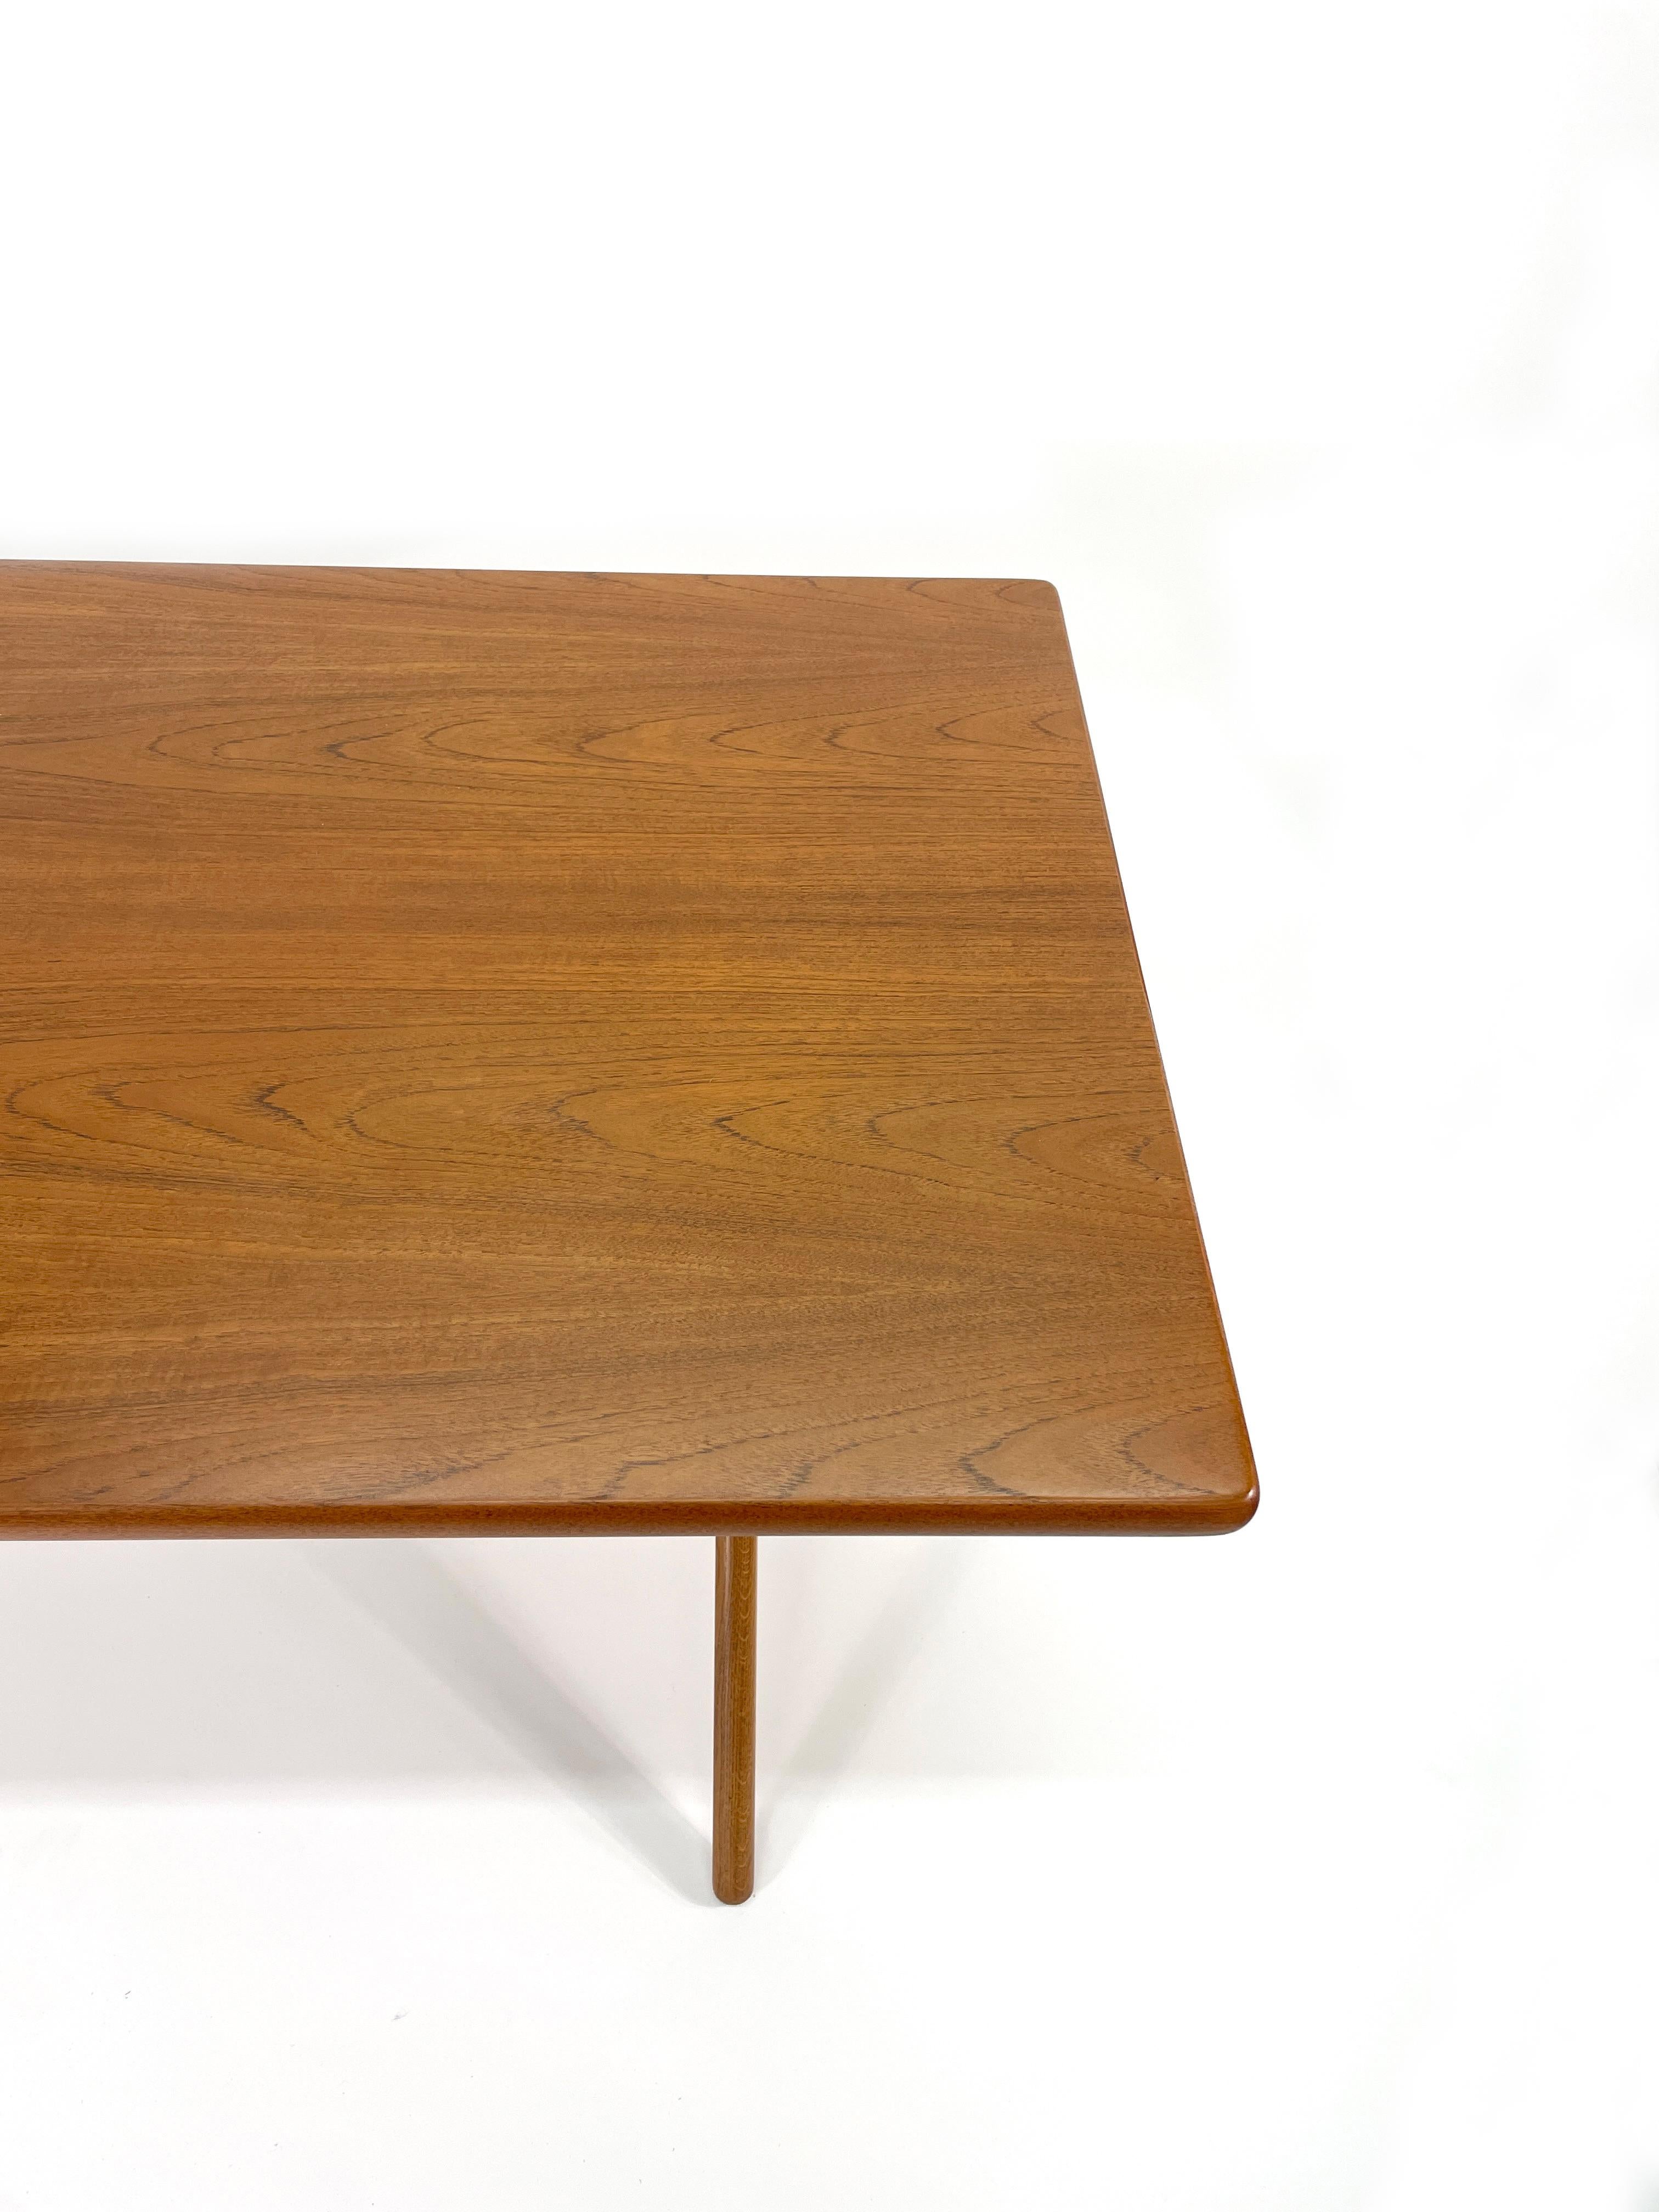 Hans J. Wegner AT-303 “Sabre” Dining Table for Andreas Tuck For Sale 6